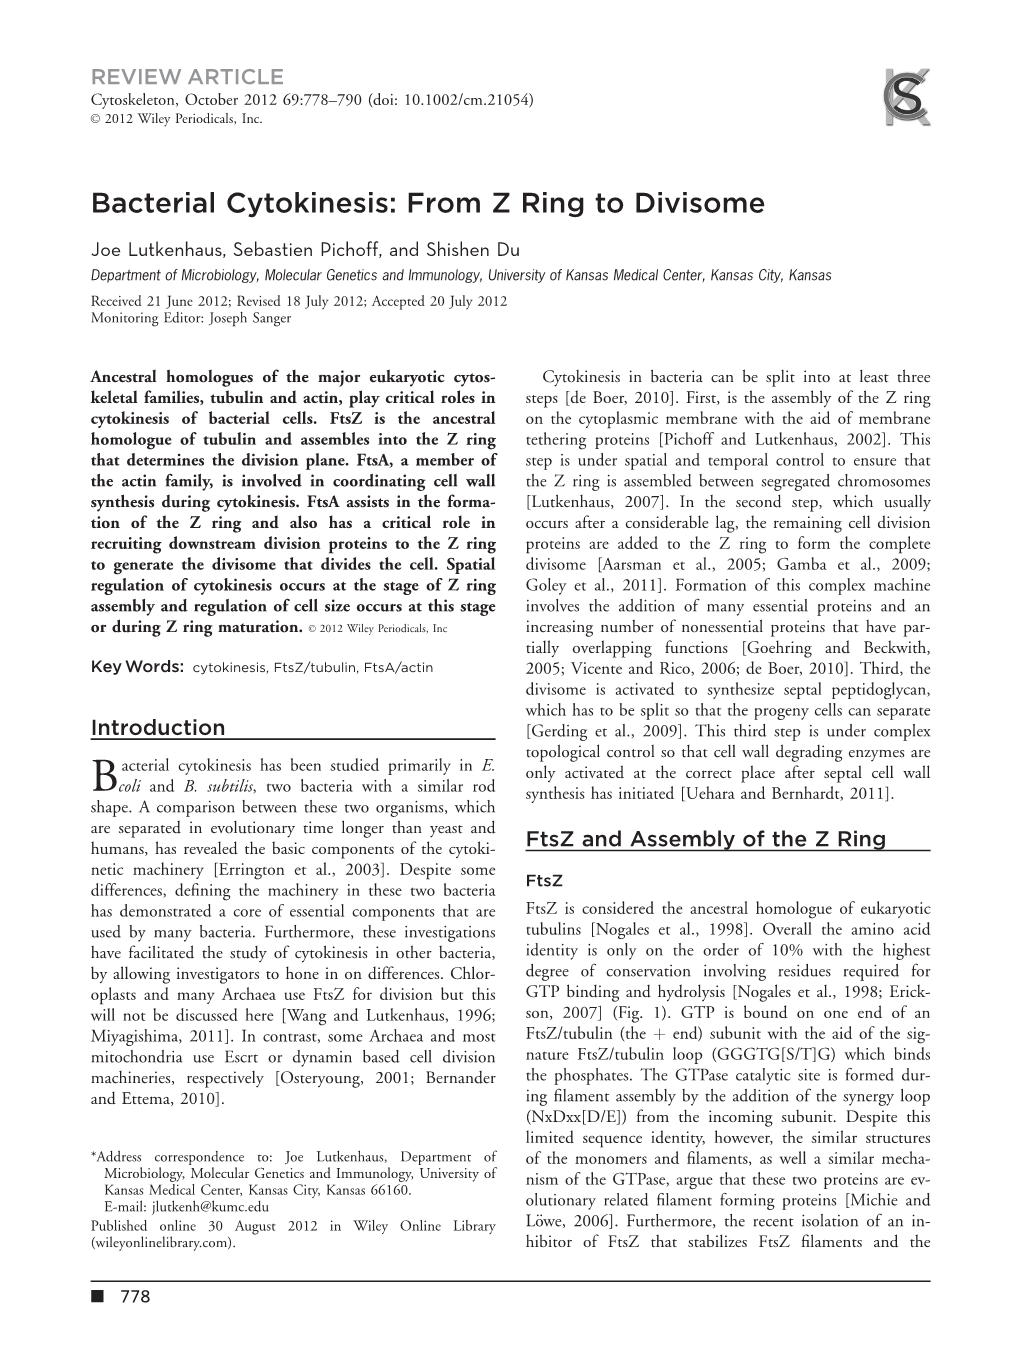 Bacterial Cytokinesis: from Z Ring to Divisome